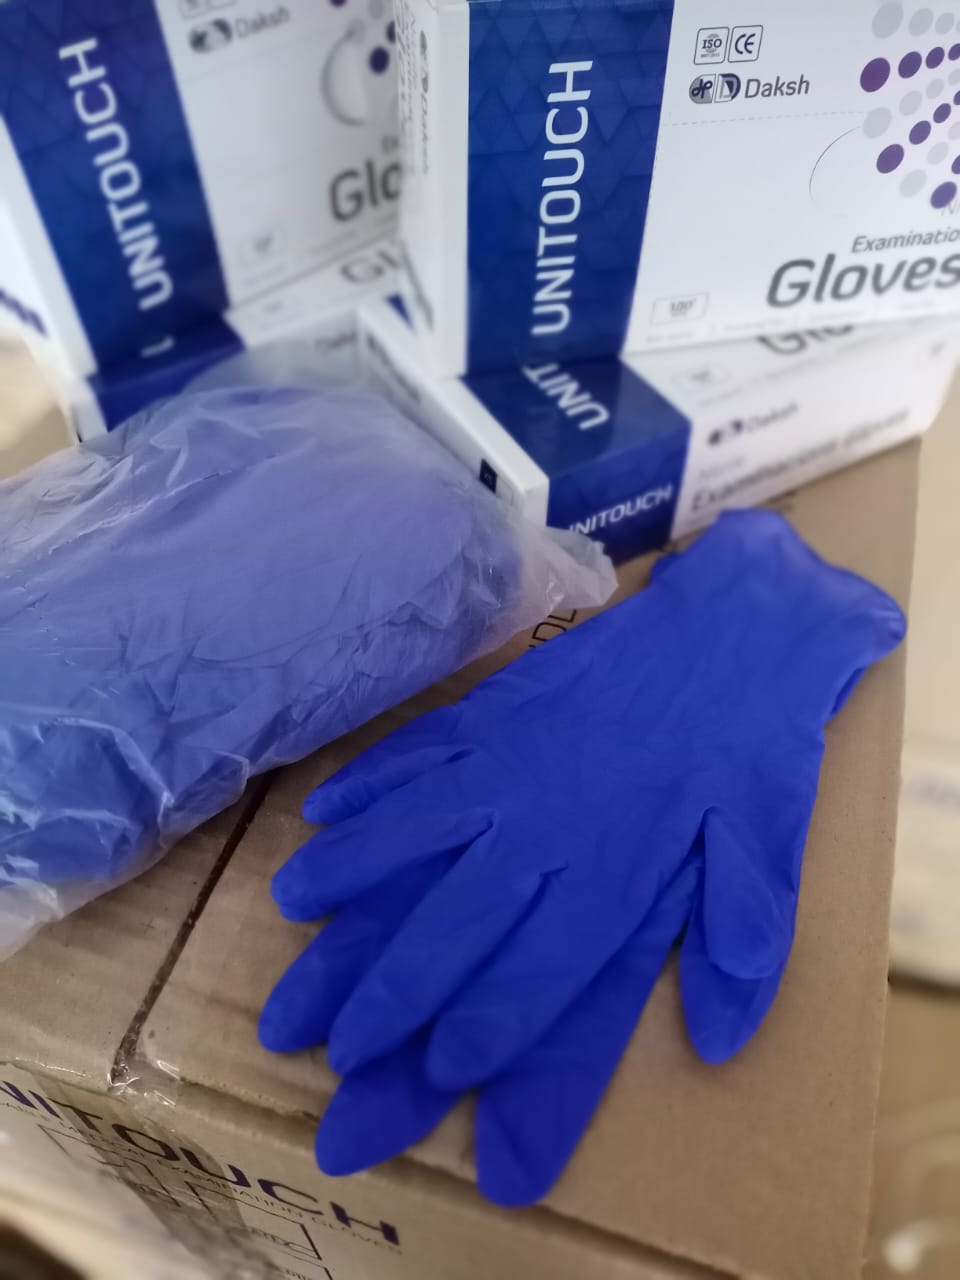 Surgical Gloves In Chandigarh | Shree Surgicals | Surgical Gloves In Chandigarh, best Surgical Gloves In Chandigarh, Surgical Gloves provider In Chandigarh, Surgical Gloves dealers In Chandigarh - GL73999